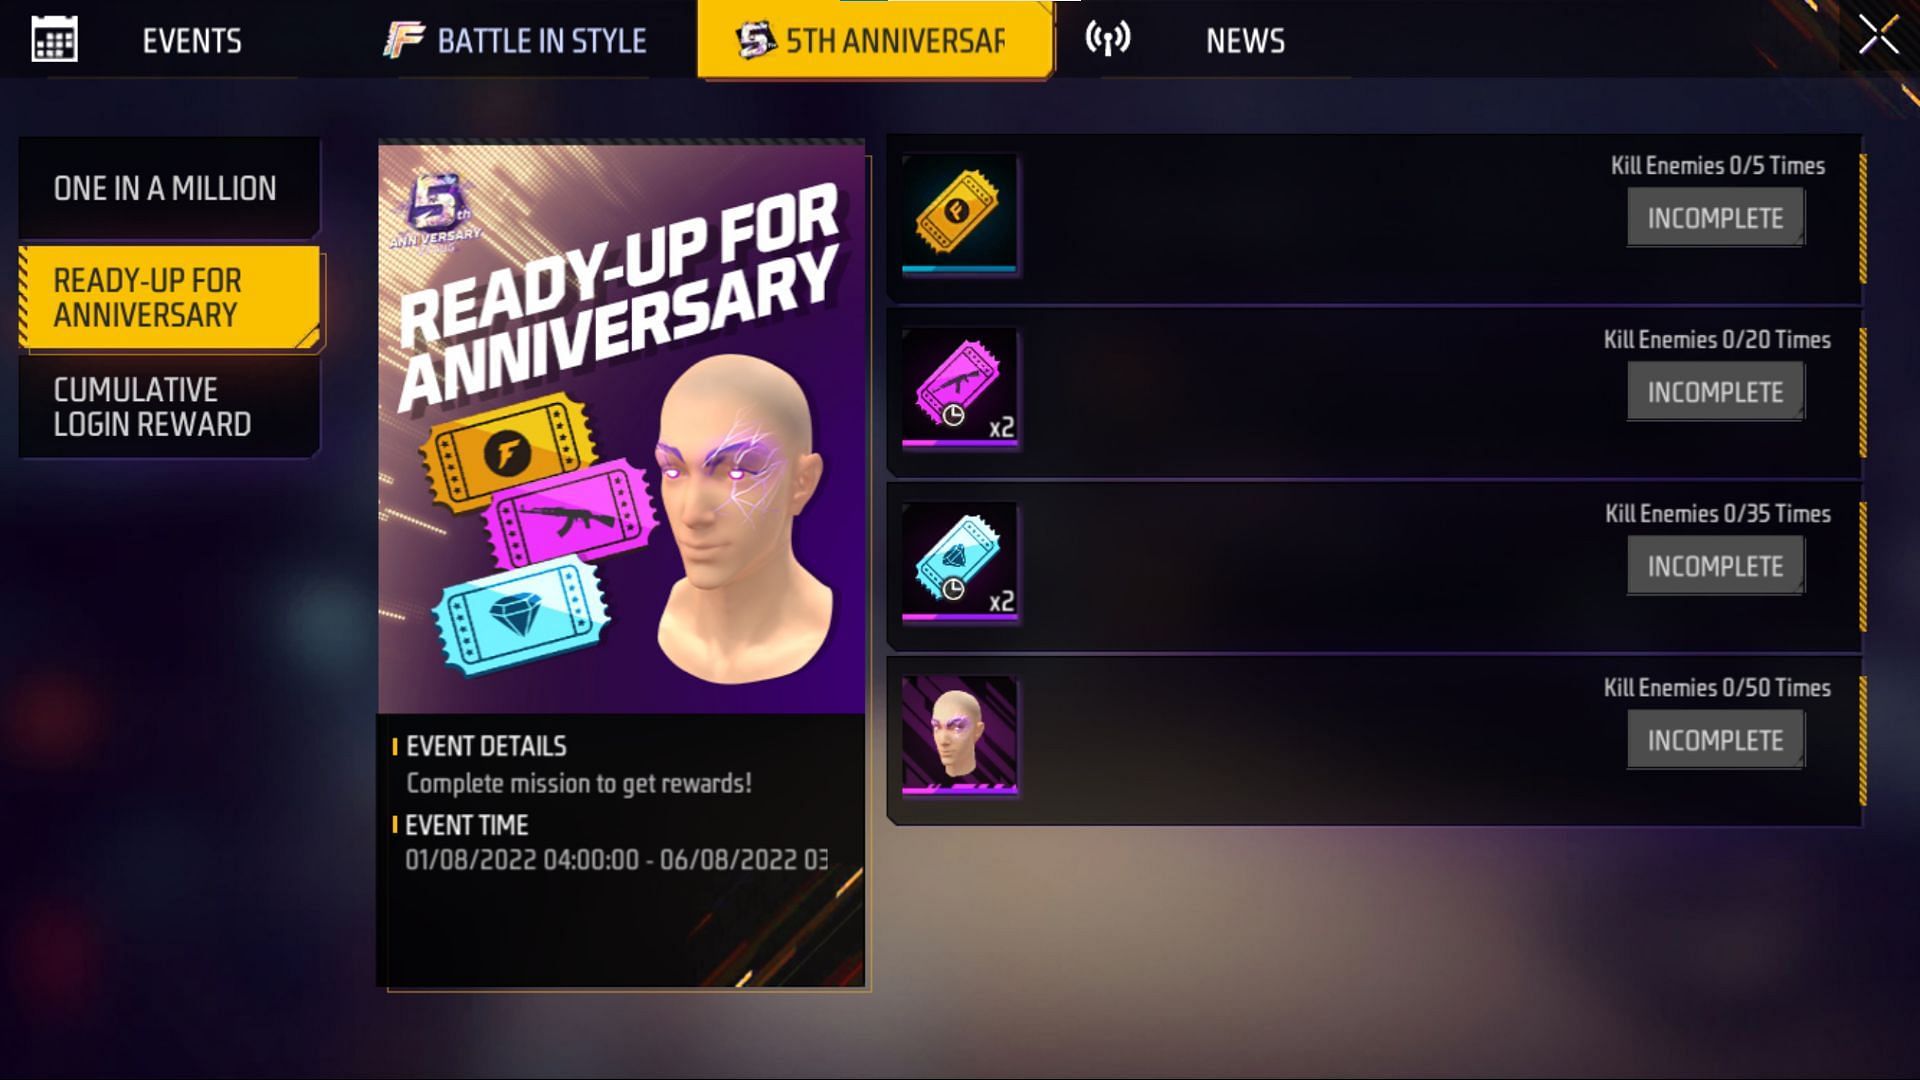 Users can receive multiple items in this new Ready-Up for Anniversary event (Image via Garena)